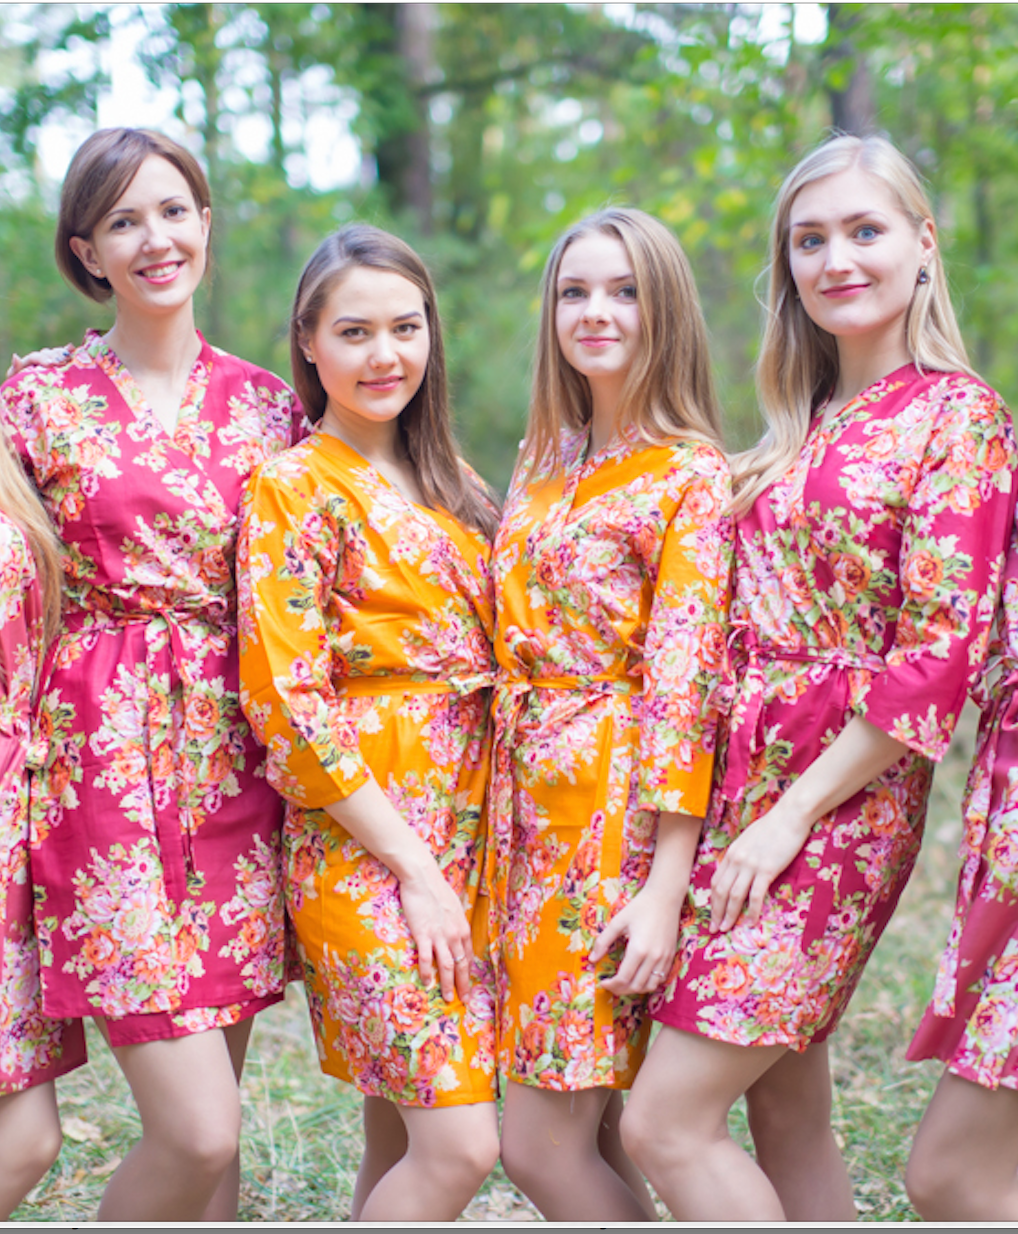 Maroon Floral Posy Robes for bridesmaids | Getting Ready Bridal Robes